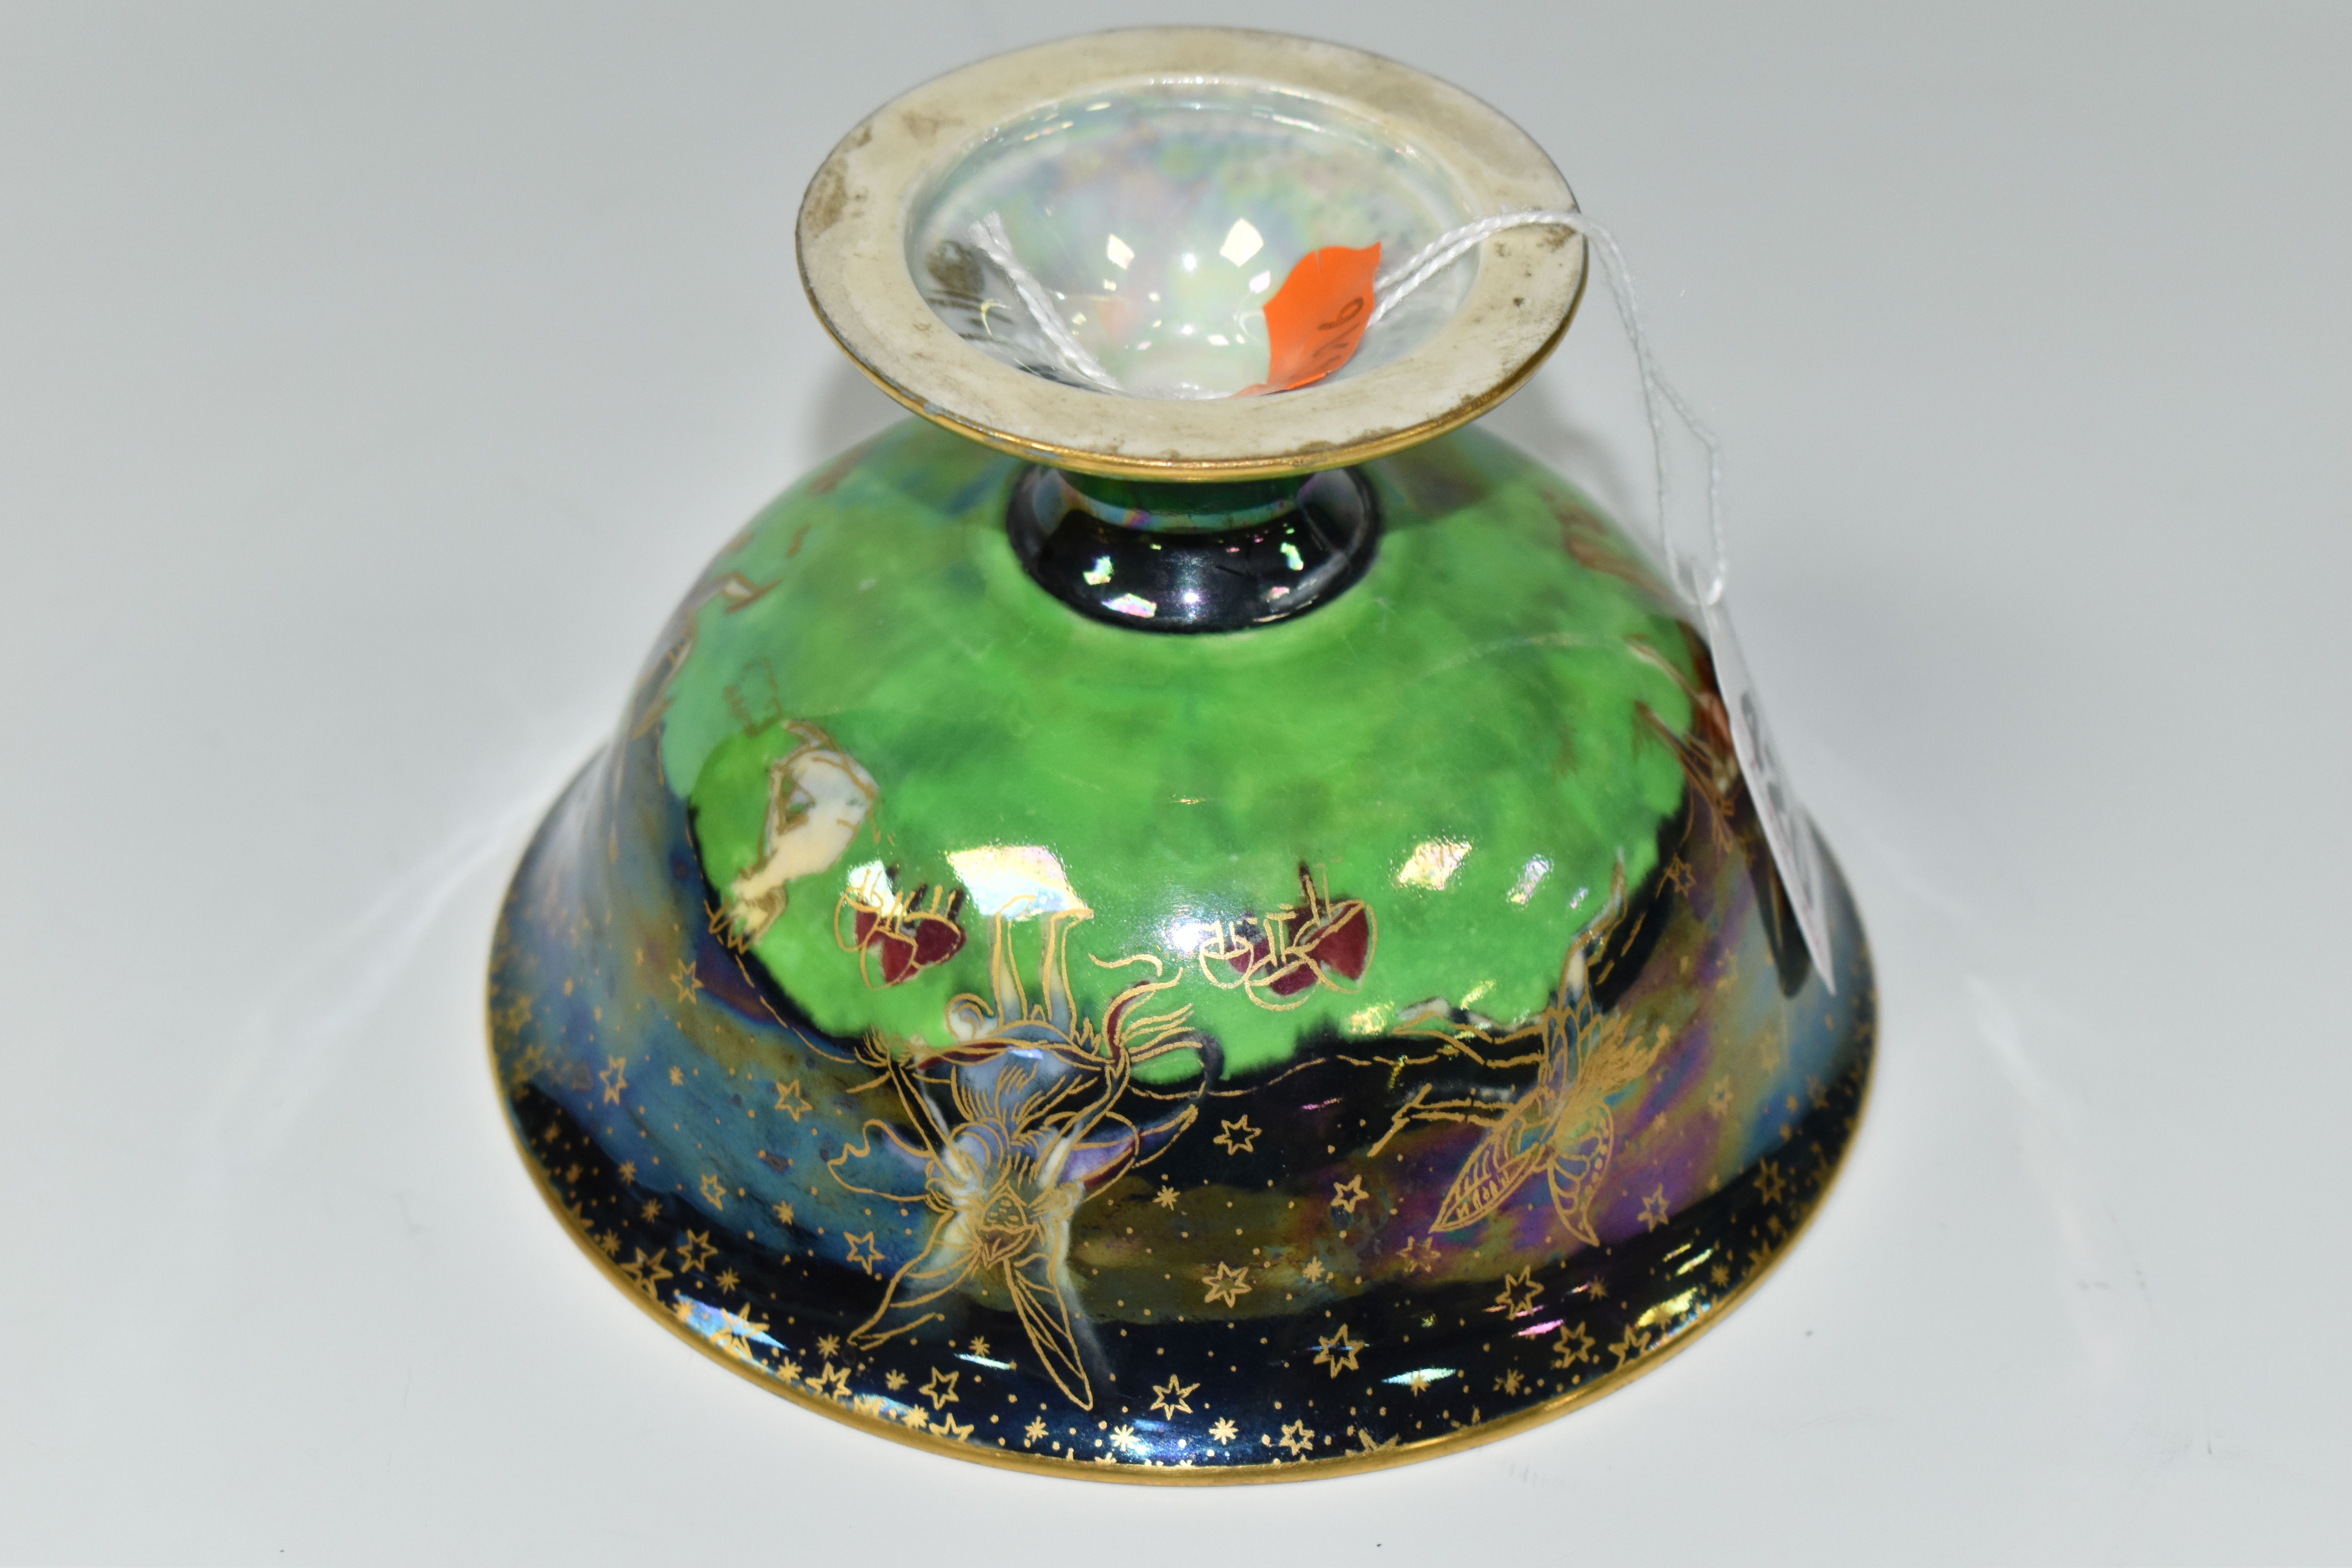 A WEDGWOOD FAIRYLAND LUSTRE FOOTED BOWL, decorated with a mother of pearl lustre with fairies in - Image 7 of 9